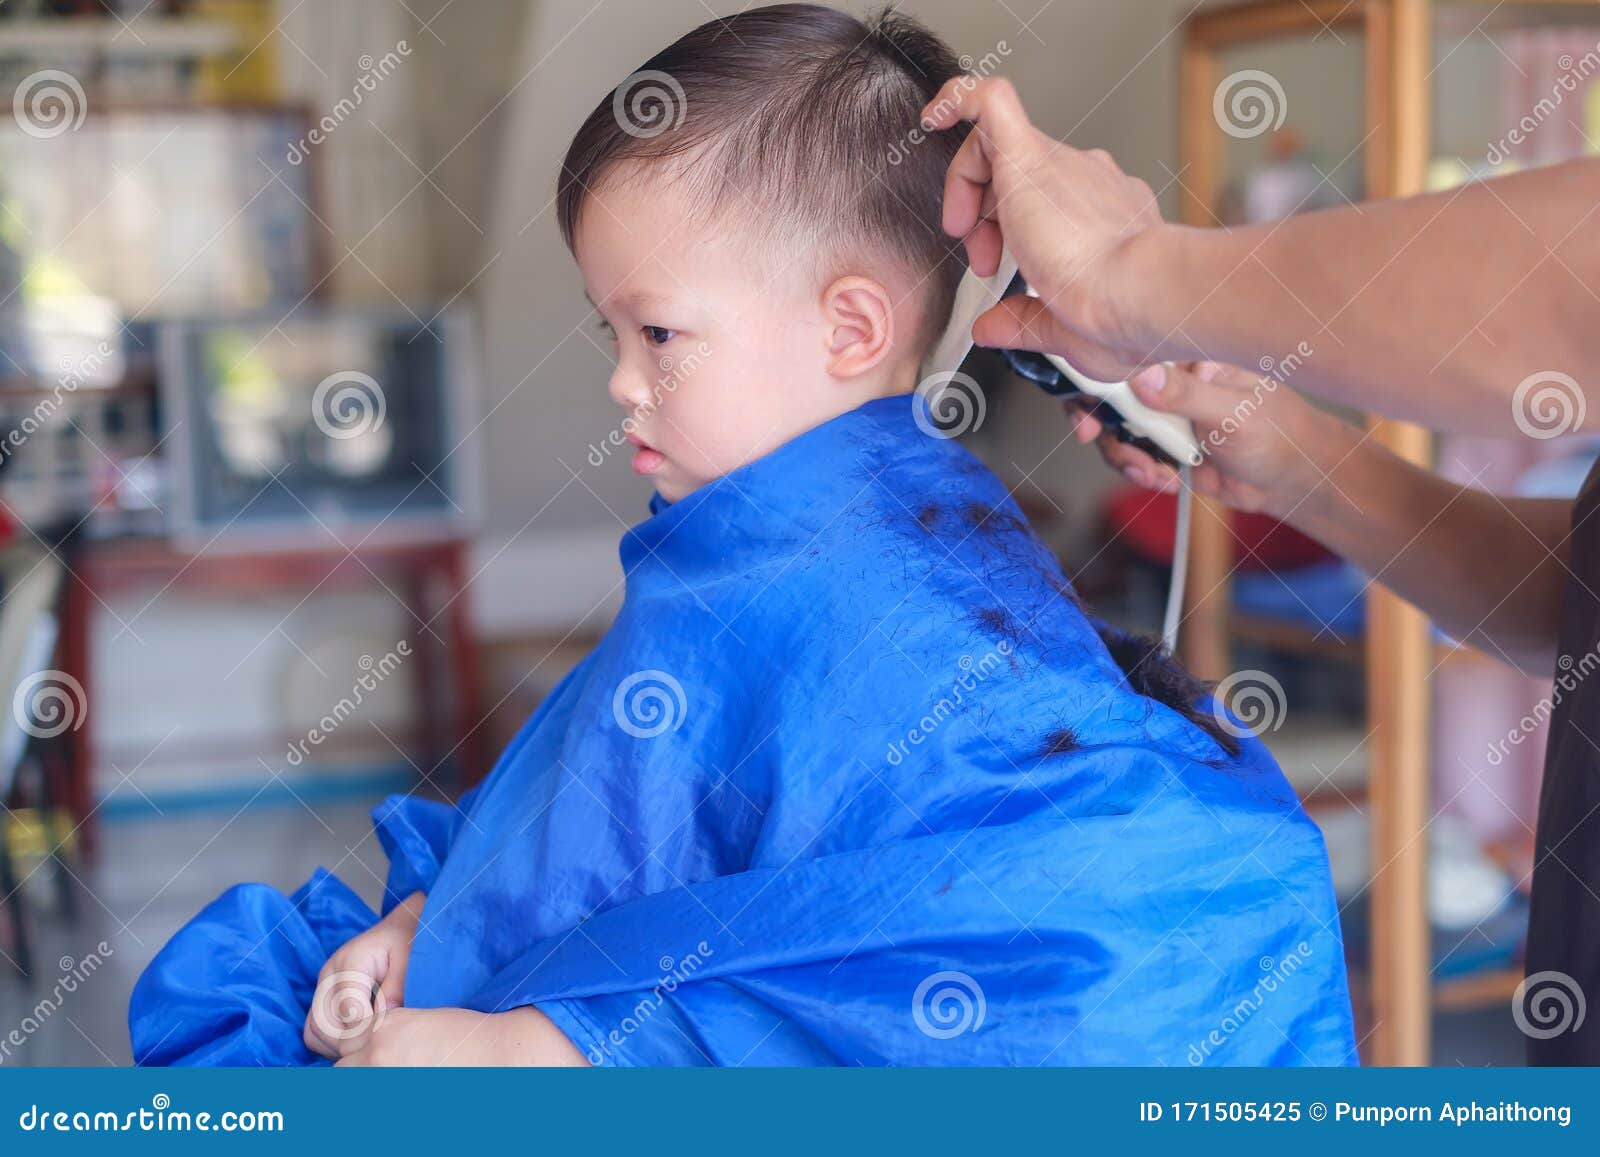 Asian 3 Years Old Toddler Baby Boy Child Getting a Haircut at the  Hairdresser`s Barber Shop Stock Image - Image of fashion, comb: 171505425